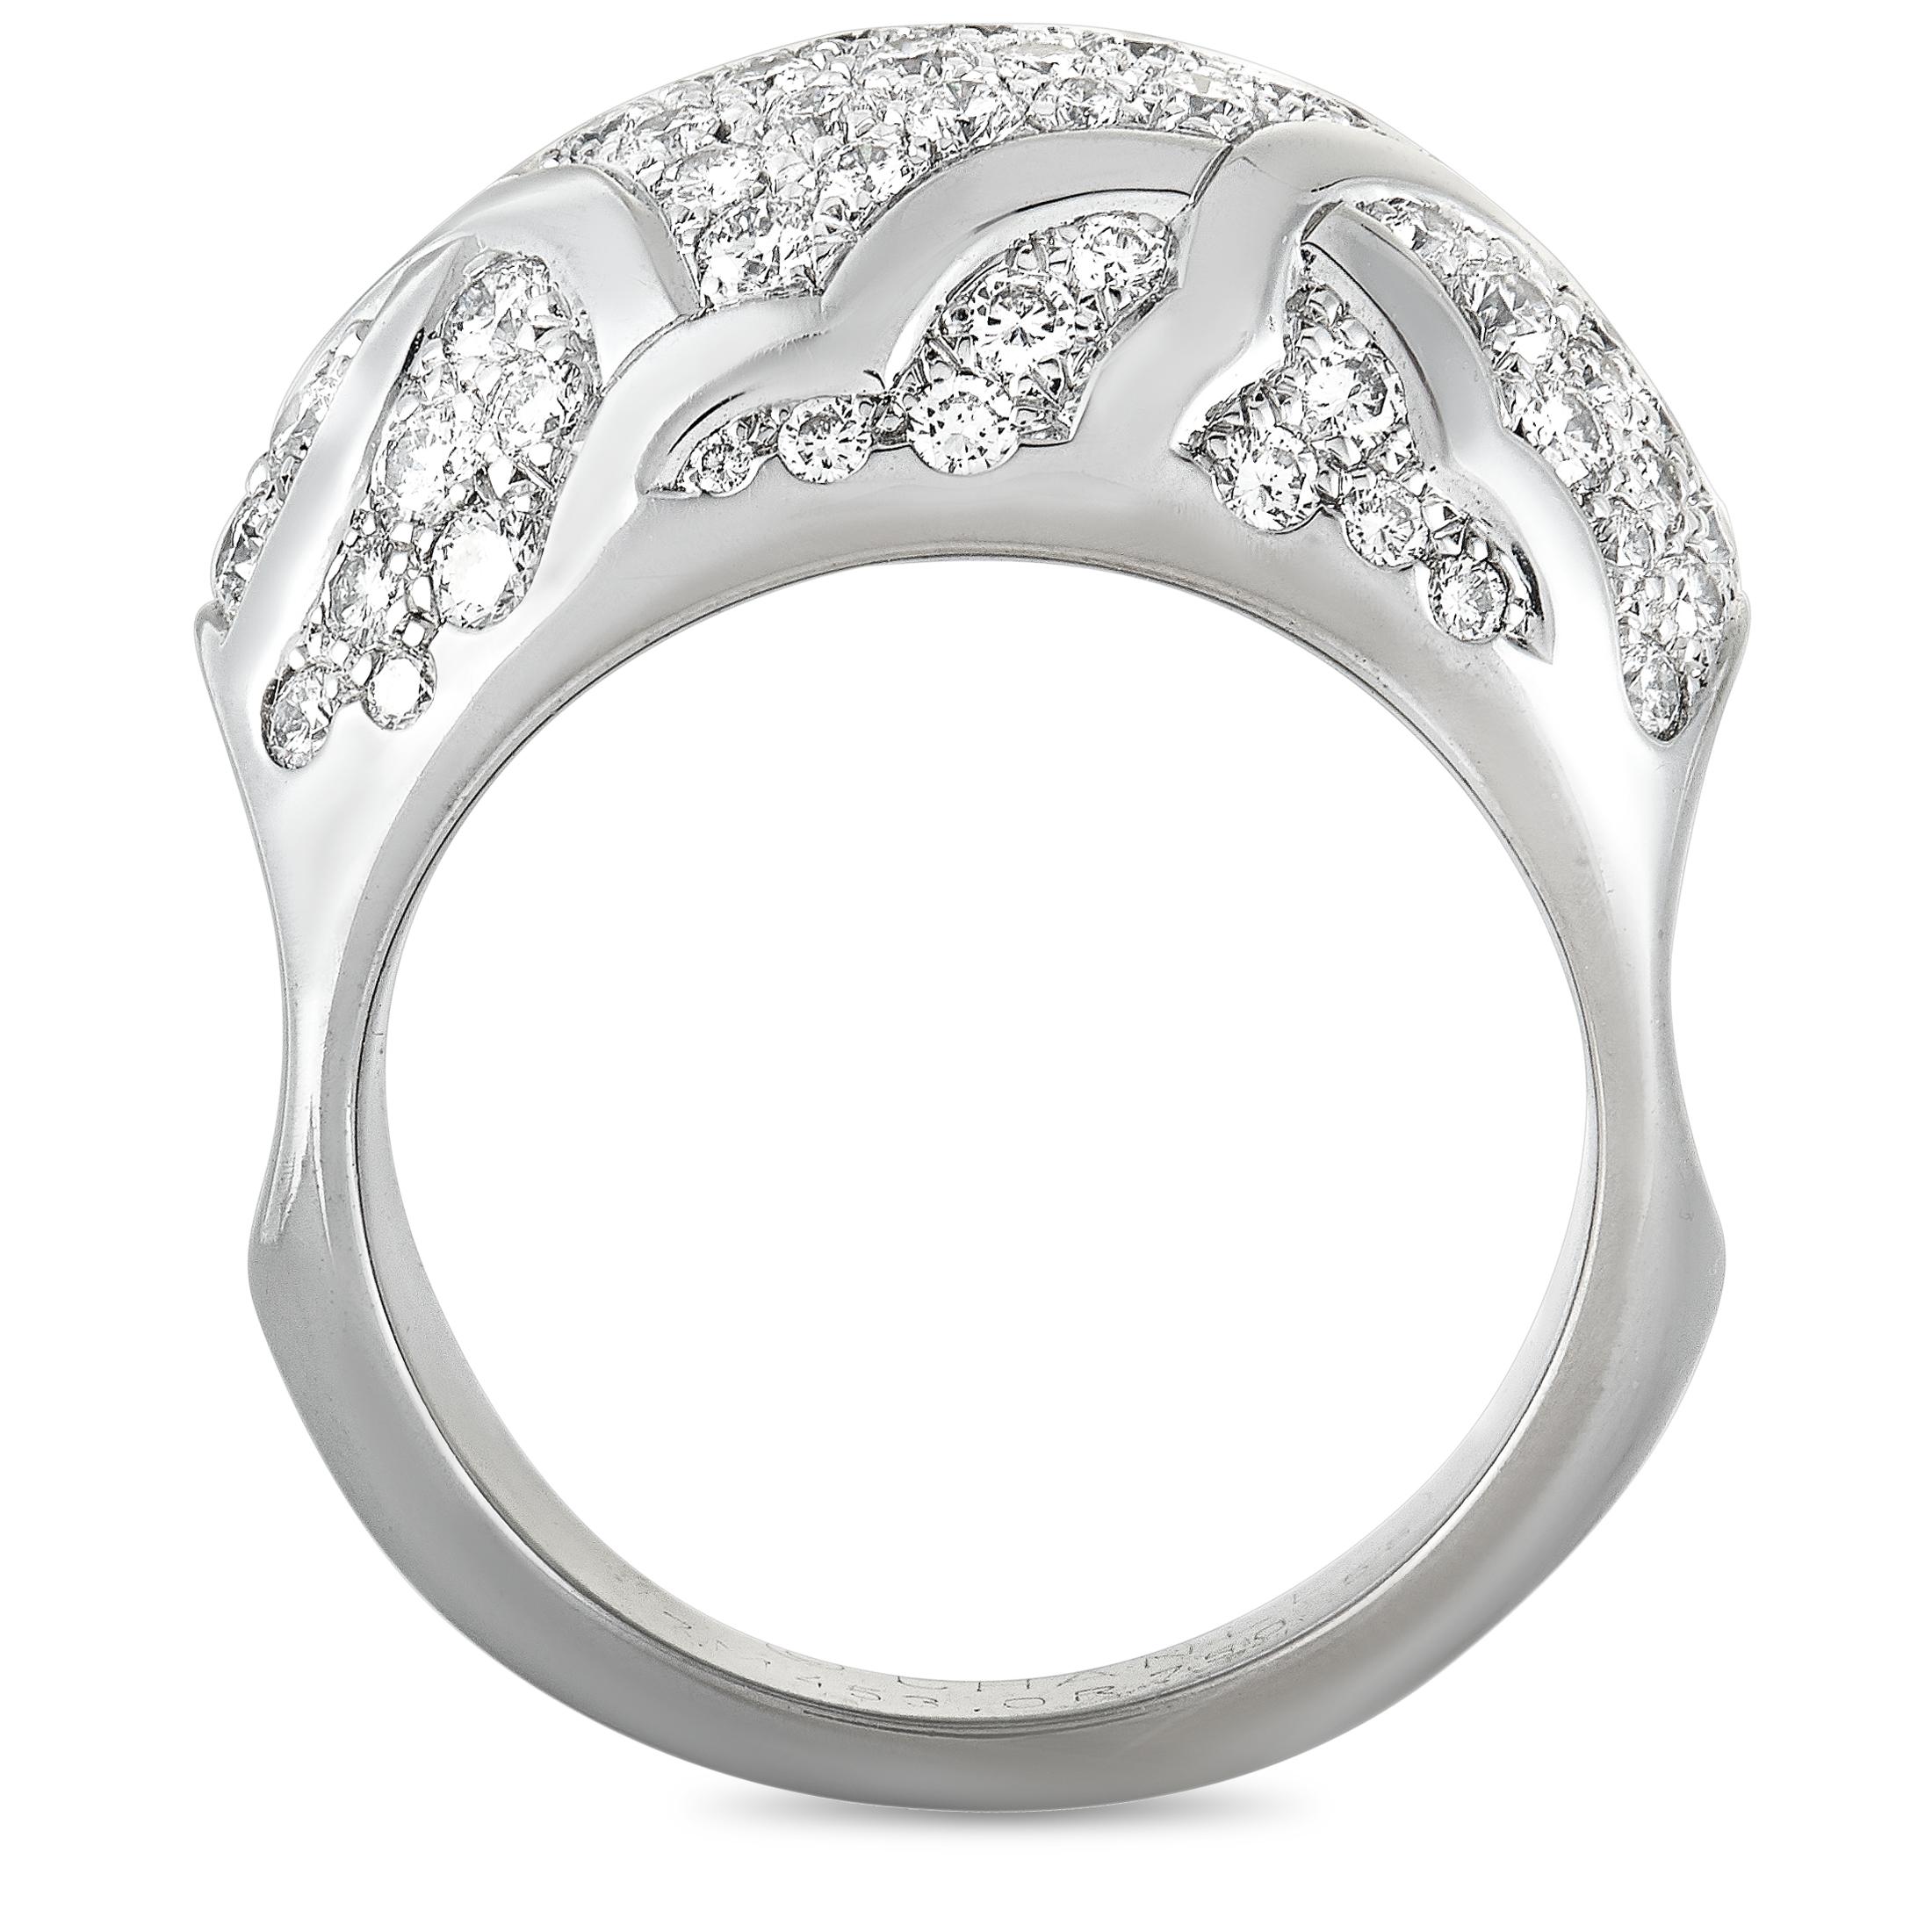 The Chanel “Camélia” ring is made out of 18K white gold and diamonds that total 1.75 carats. The ring weighs 18.3 grams, boasting band thickness of 4 mm and top height of 7 mm, while top dimensions measure 23 by 13 mm.

This jewelry piece is offered